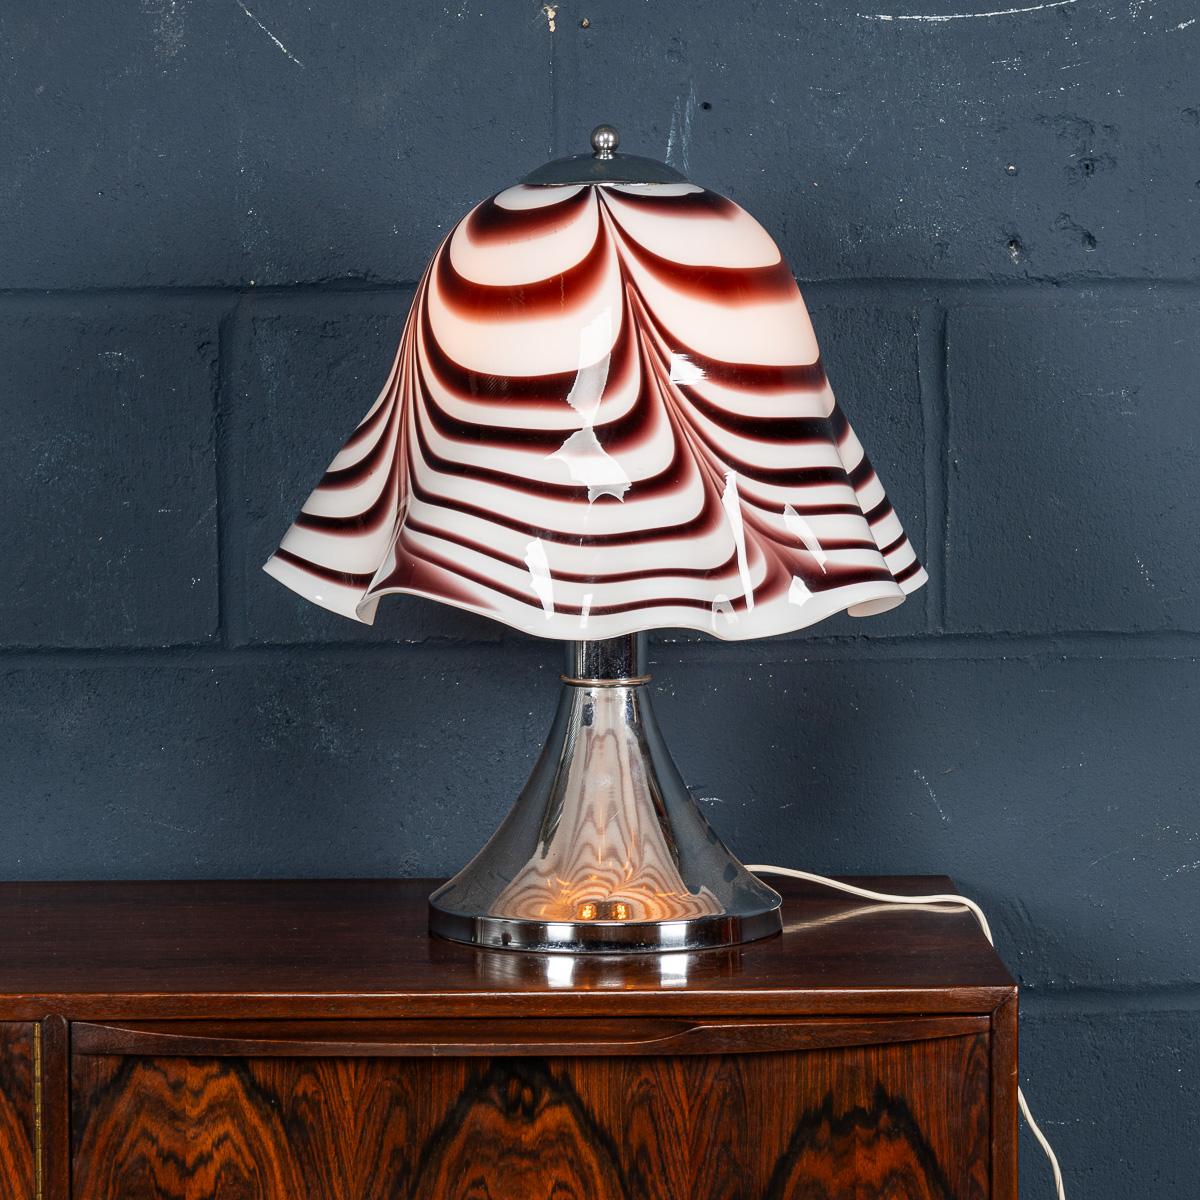 Introducing an exquisitely crafted chrome and glass table lamp originating from Italy during the mid-20th century. The chrome stand serves as a graceful support for a handcrafted glass 